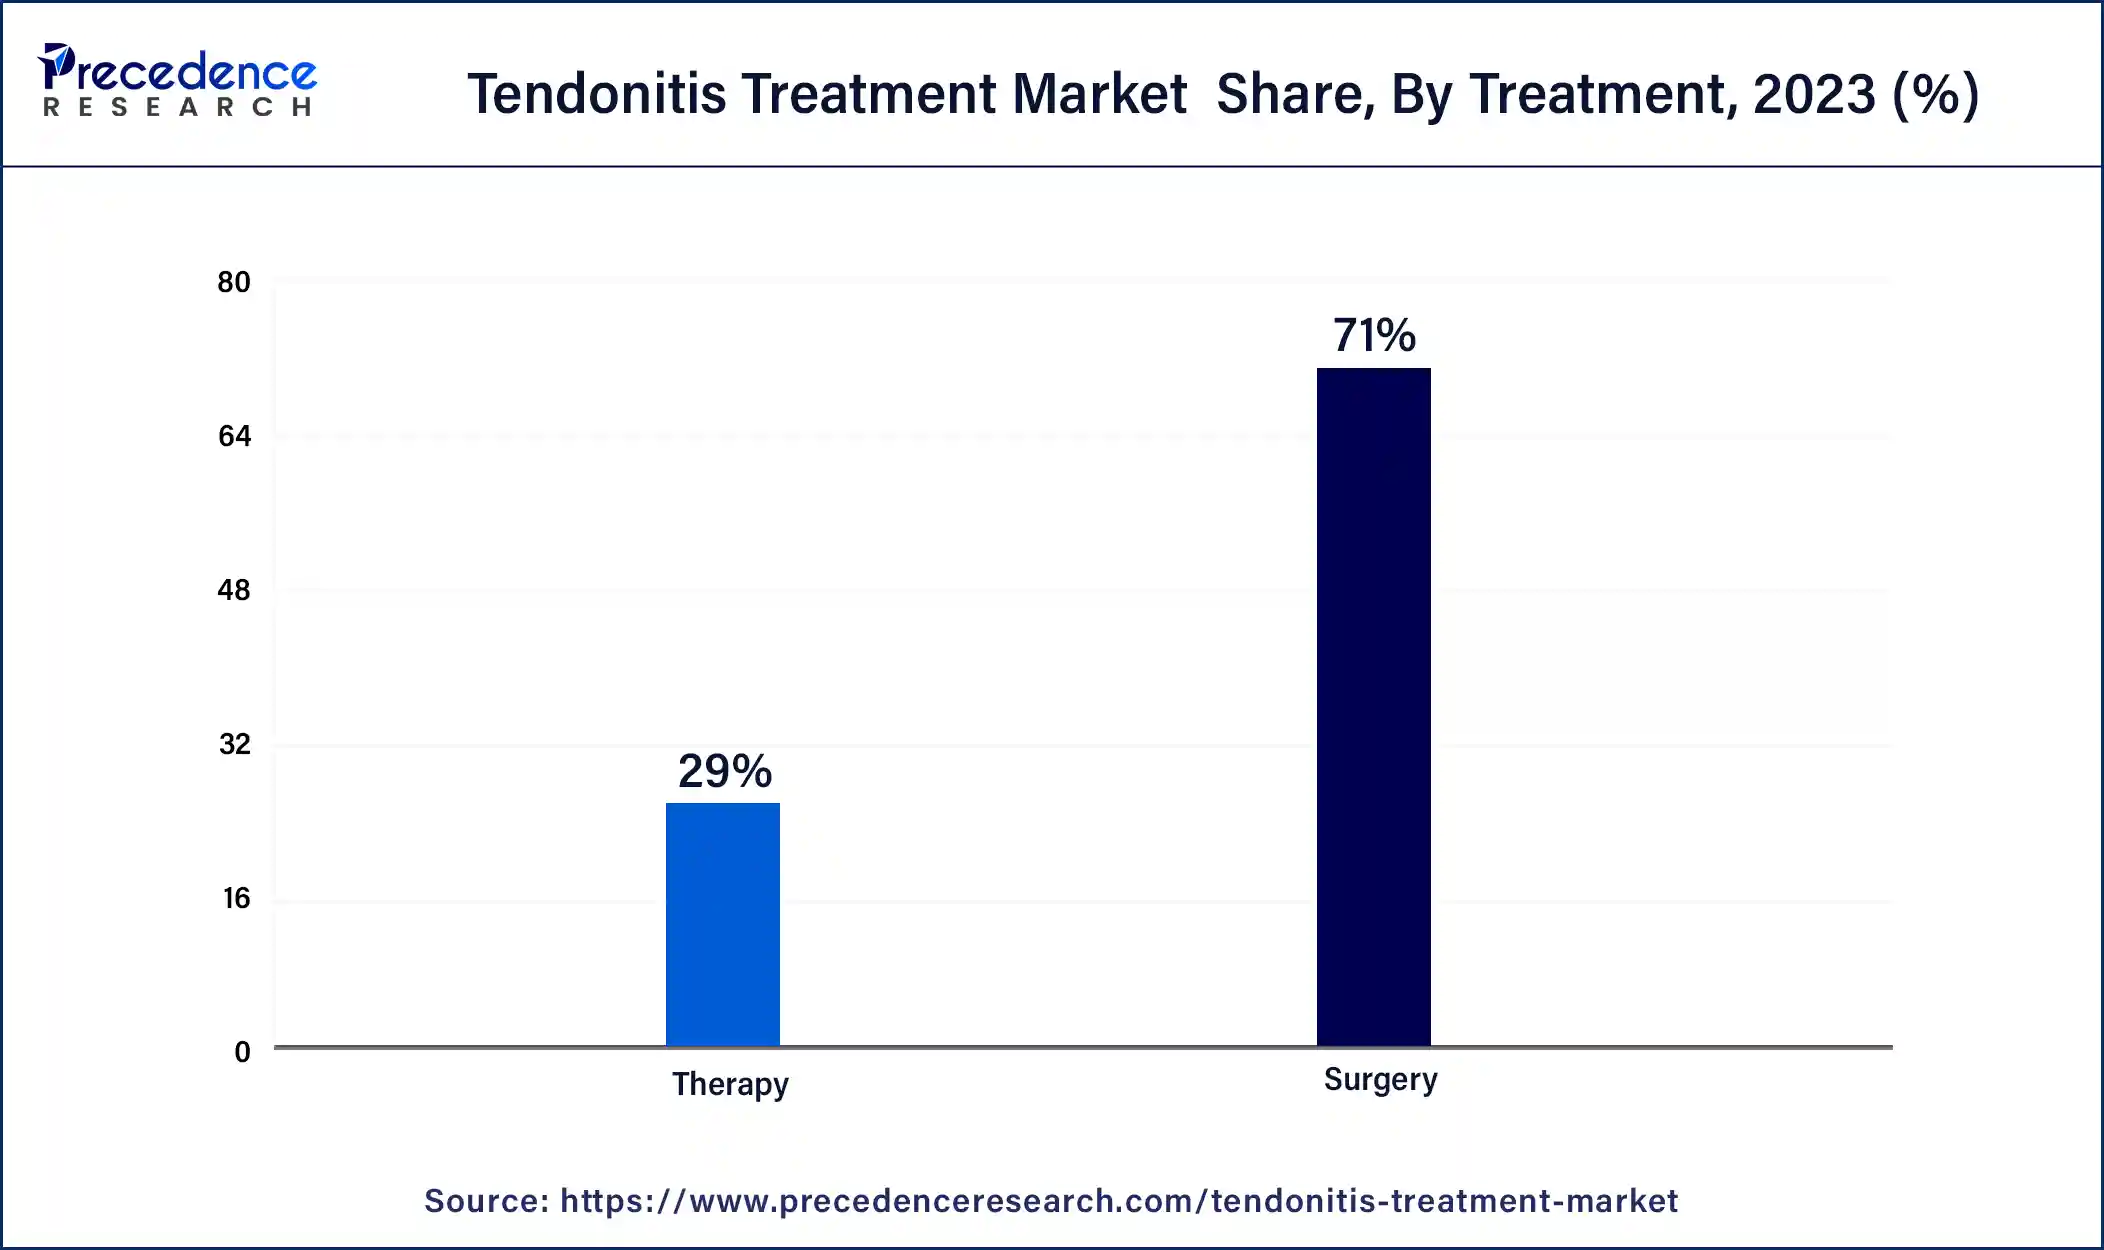 Tendonitis Treatment Market Share, By Treatment 2023 (%)